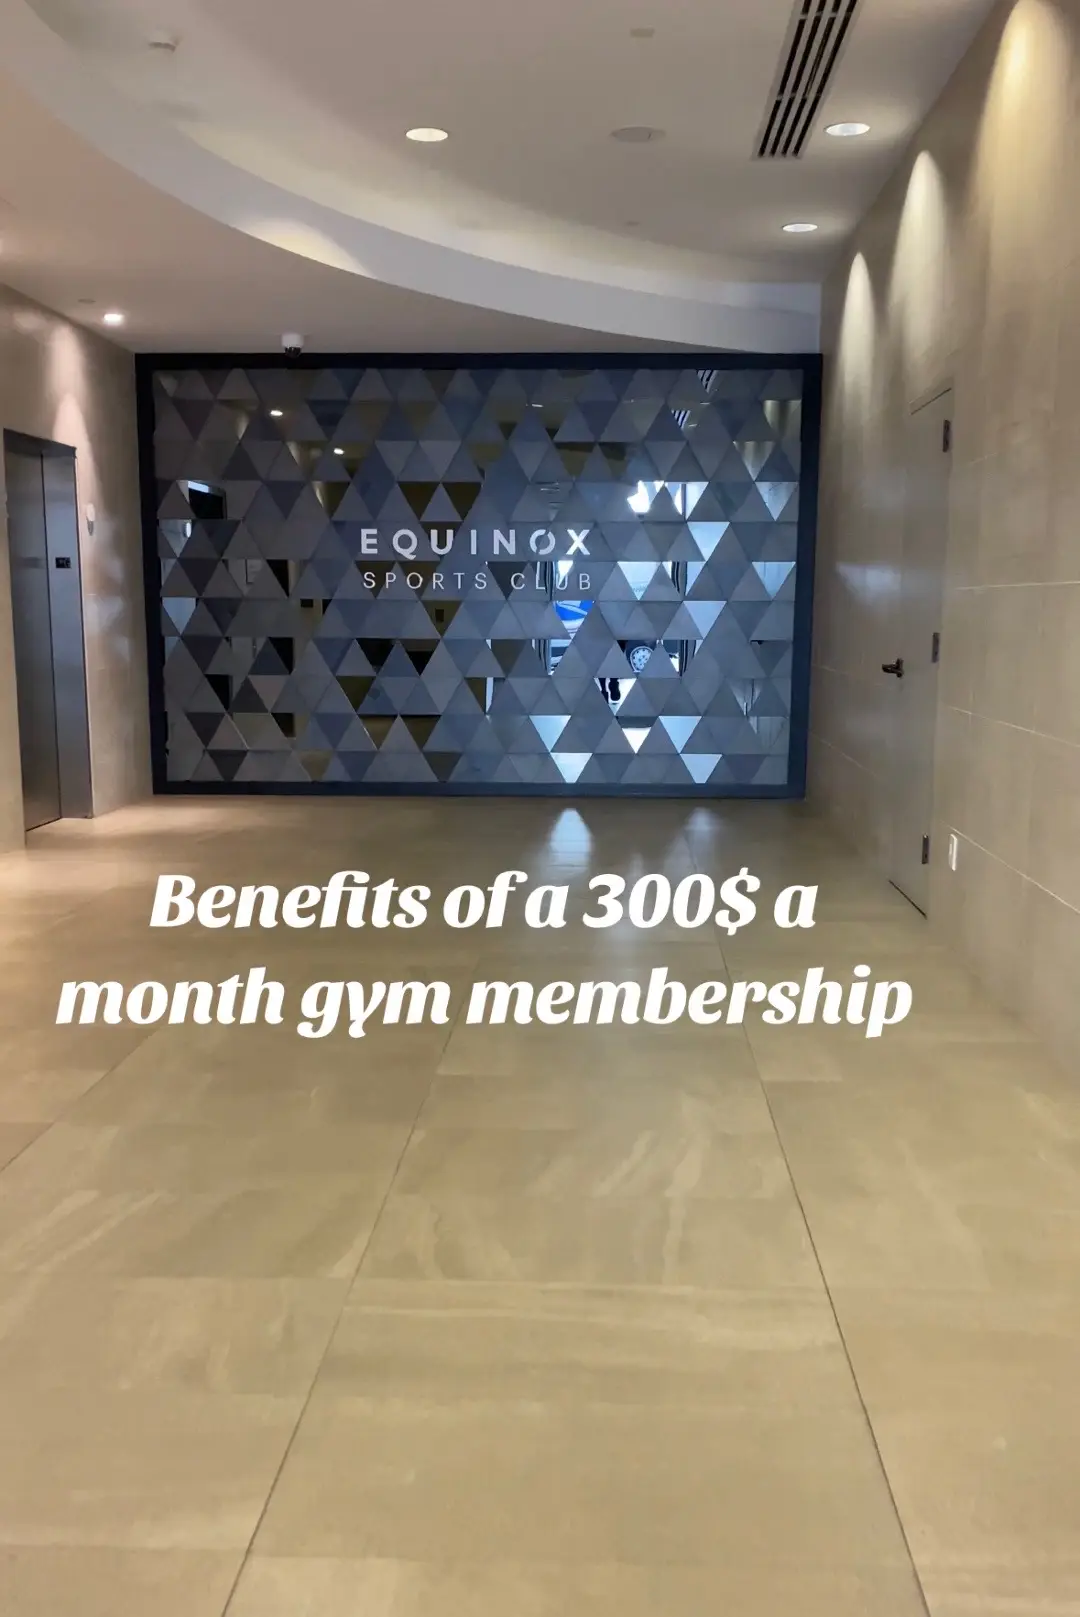 They also offer complementary laundry service 😭 should I do a part 2 ? #GymTok #gym #Fitness #equinox #luxury #luxuryliving #luxurygirl #city #citylife #gymmotivation #GymLife #gymlover #gymrat #fitnessroutine #fitnessmotivation #blackgirltiktok #luxurygym @Equinox 